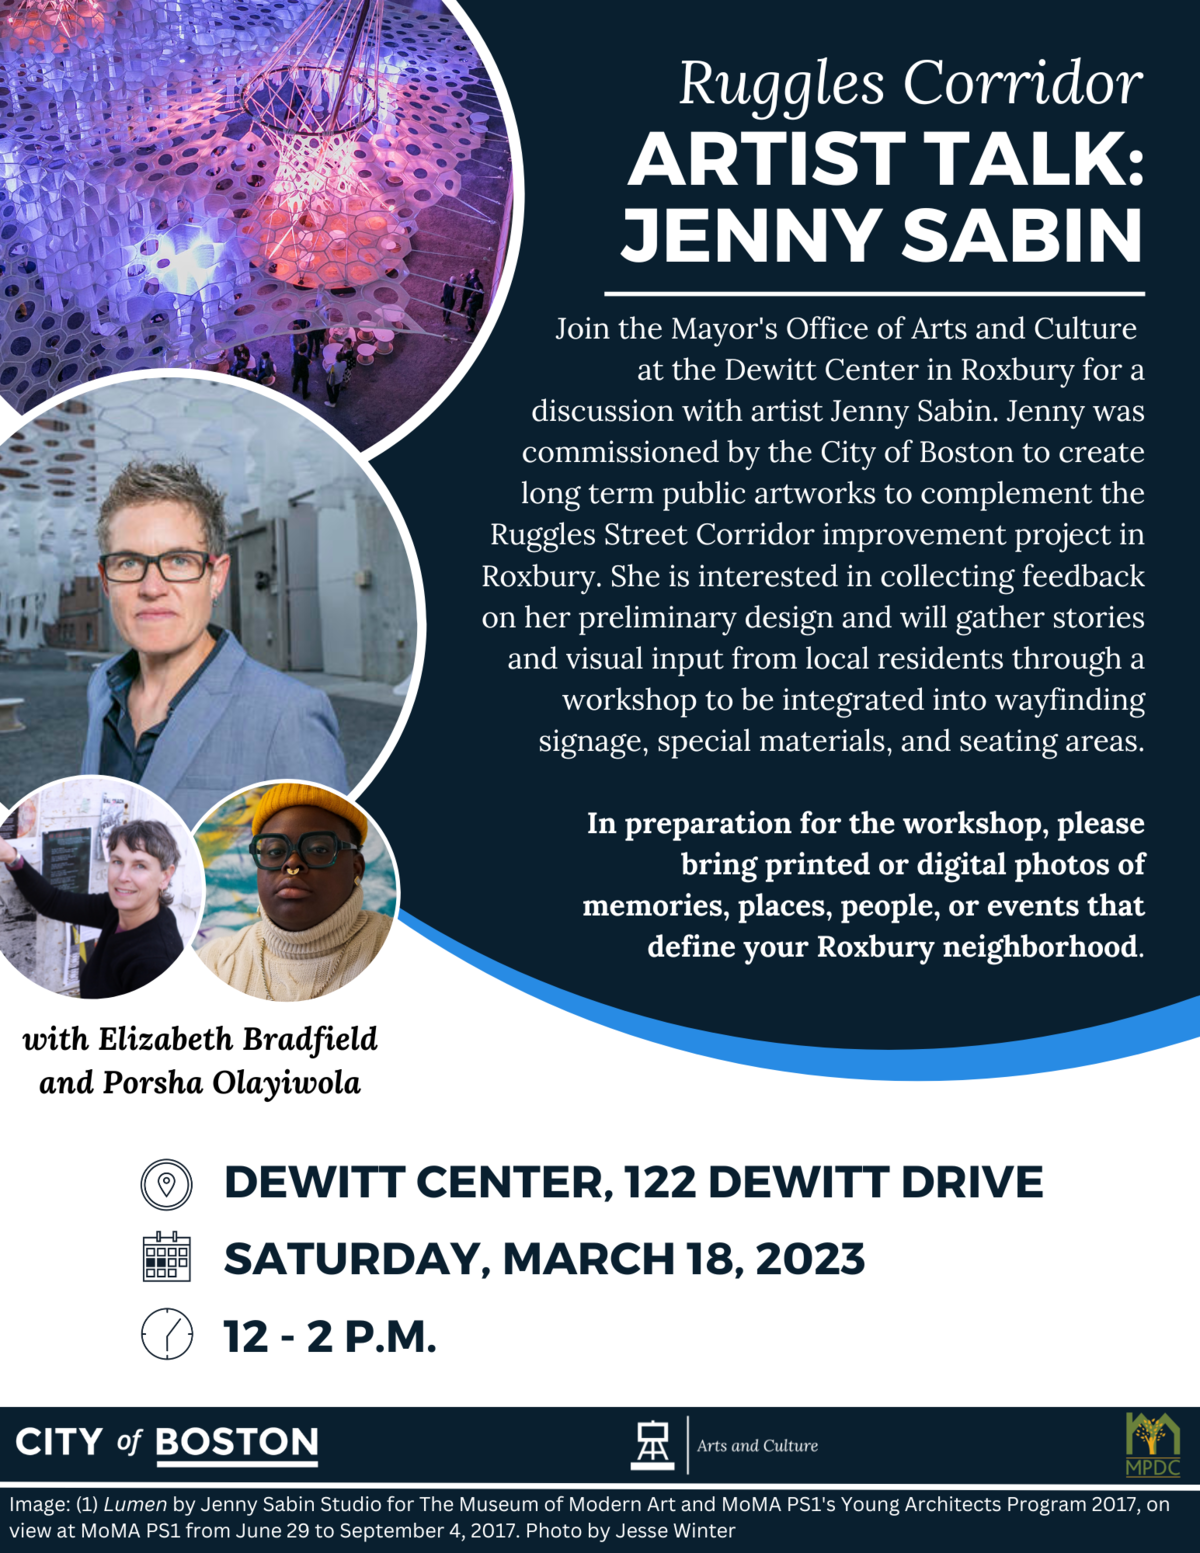 Ruggles Corridor Artist Talk: Jenny Sabin, with Elizabeth Bradfield and Porsha Olayiwola. Dewitt Center, 122 Dewitt Drive, Saturday, March 18, 2023, 12 - 2 p.m. In preparation for the workshop, please bring printed or digital photos of memories, places, people, or events that define your Roxbury neighborhood.